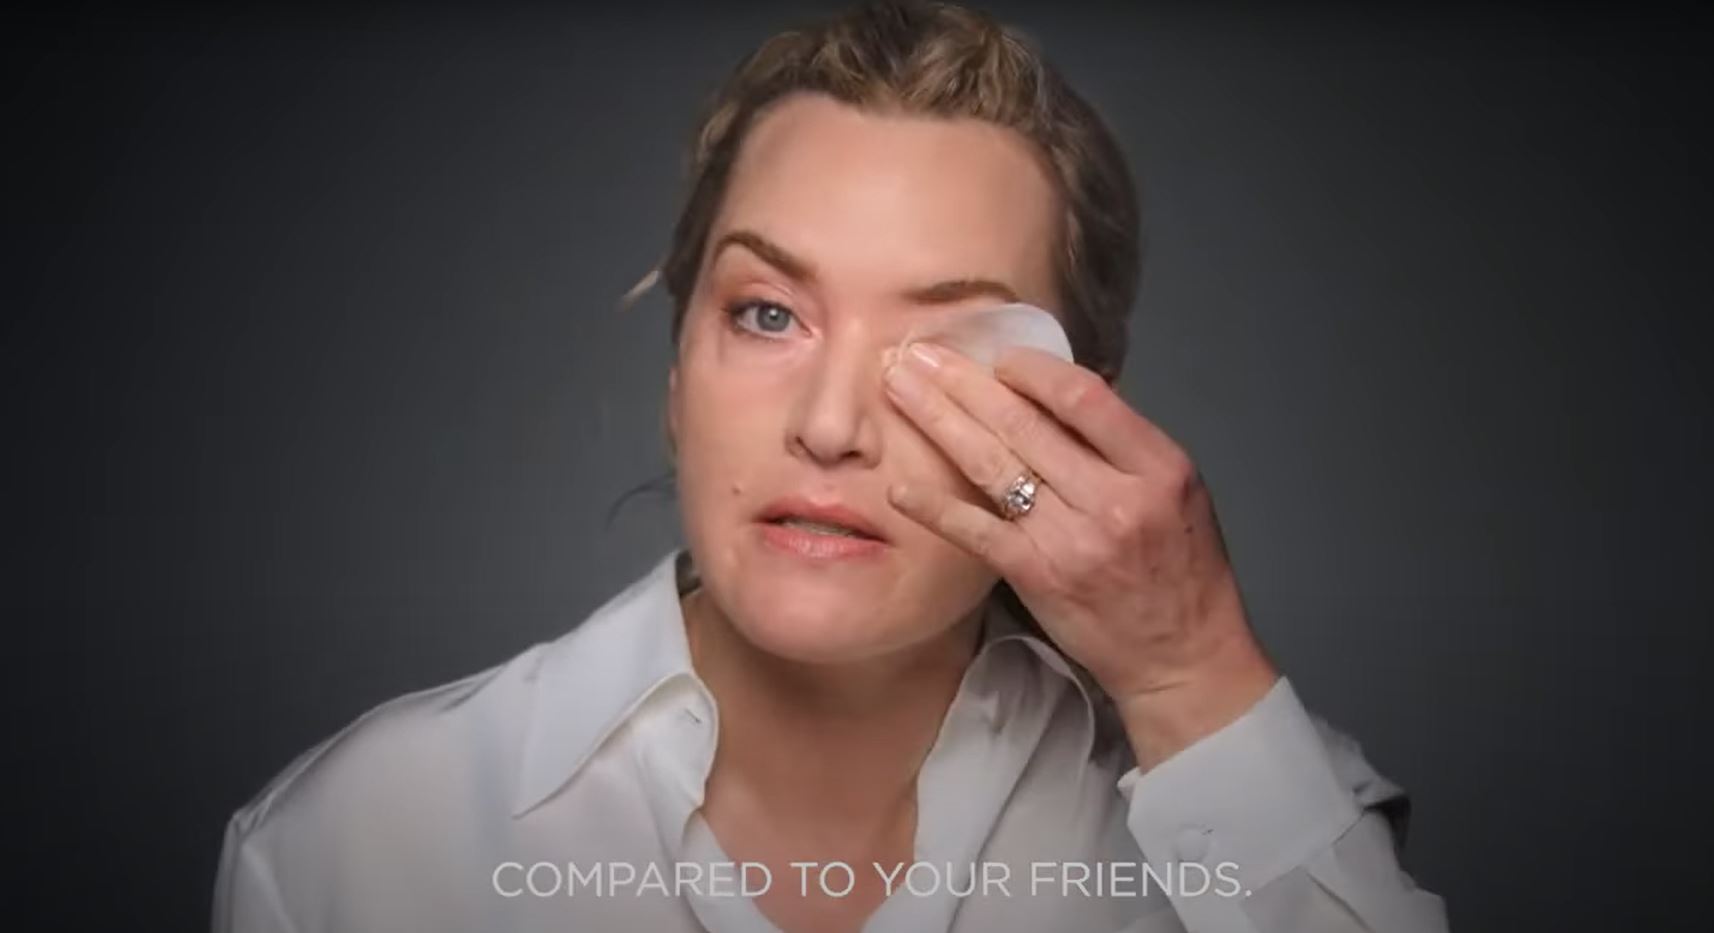 Kate Winslet took OFF her make-up for a 2022 advert to celebrate International Boost Self-Esteem Month